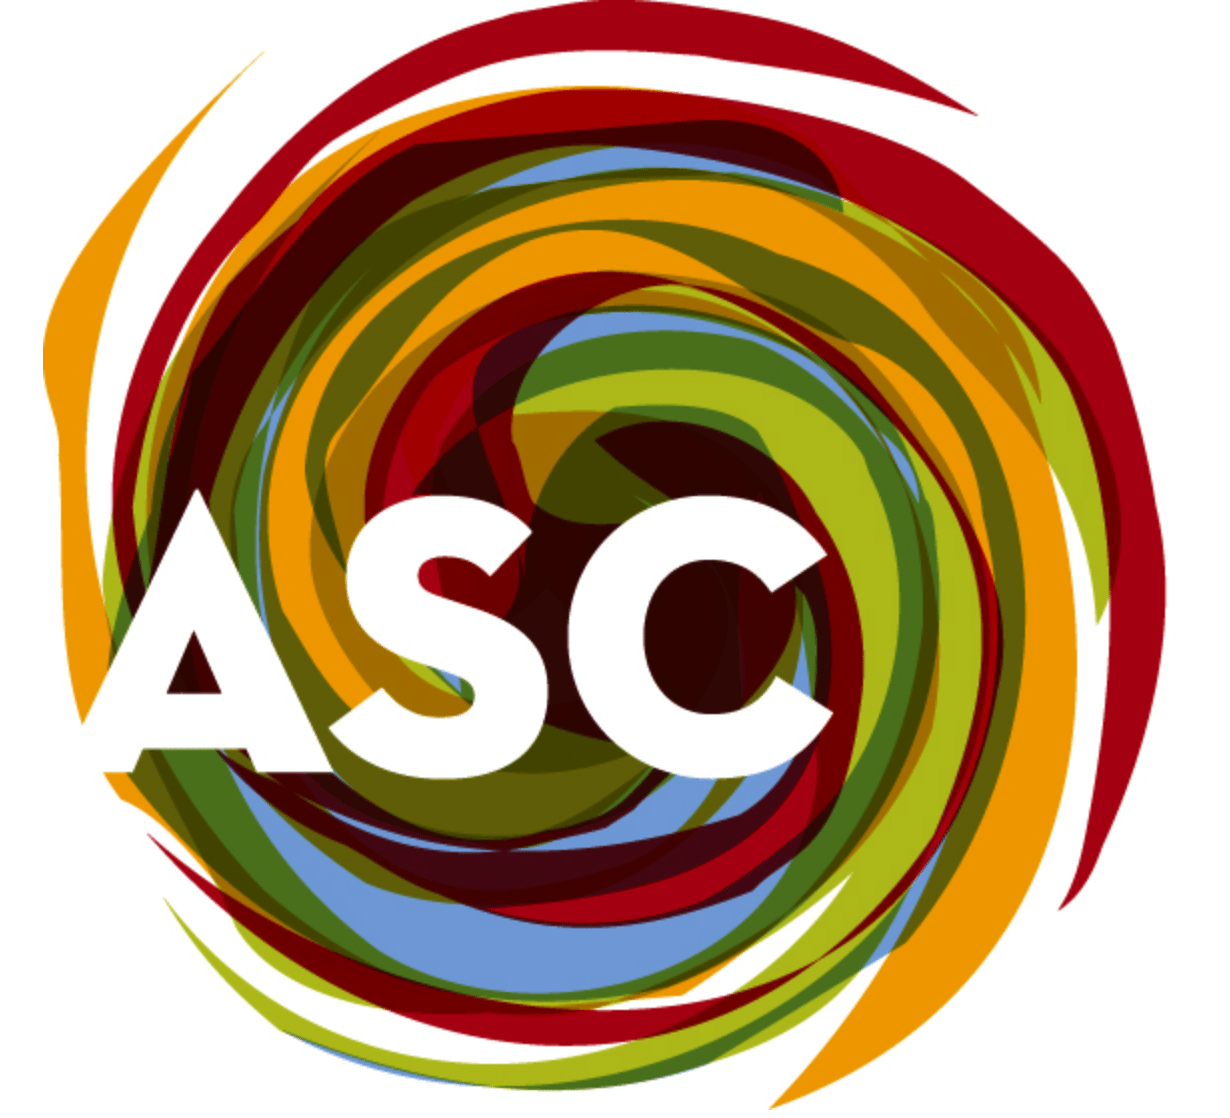  ASC CONNECT WITH CULTURE DAY